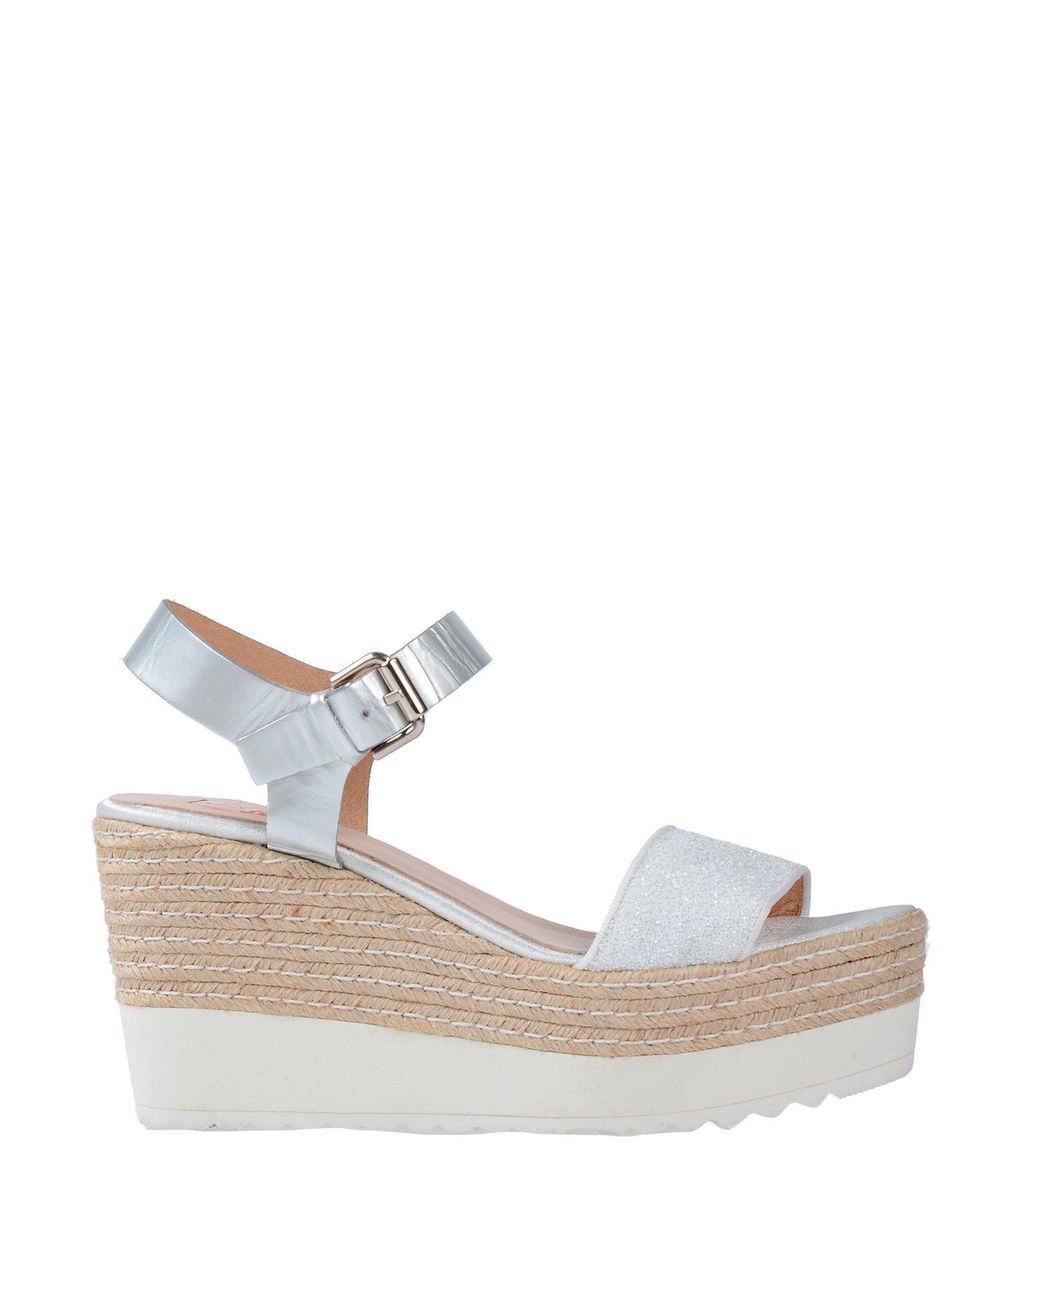 Kanna Leather Sandals in White - Lyst